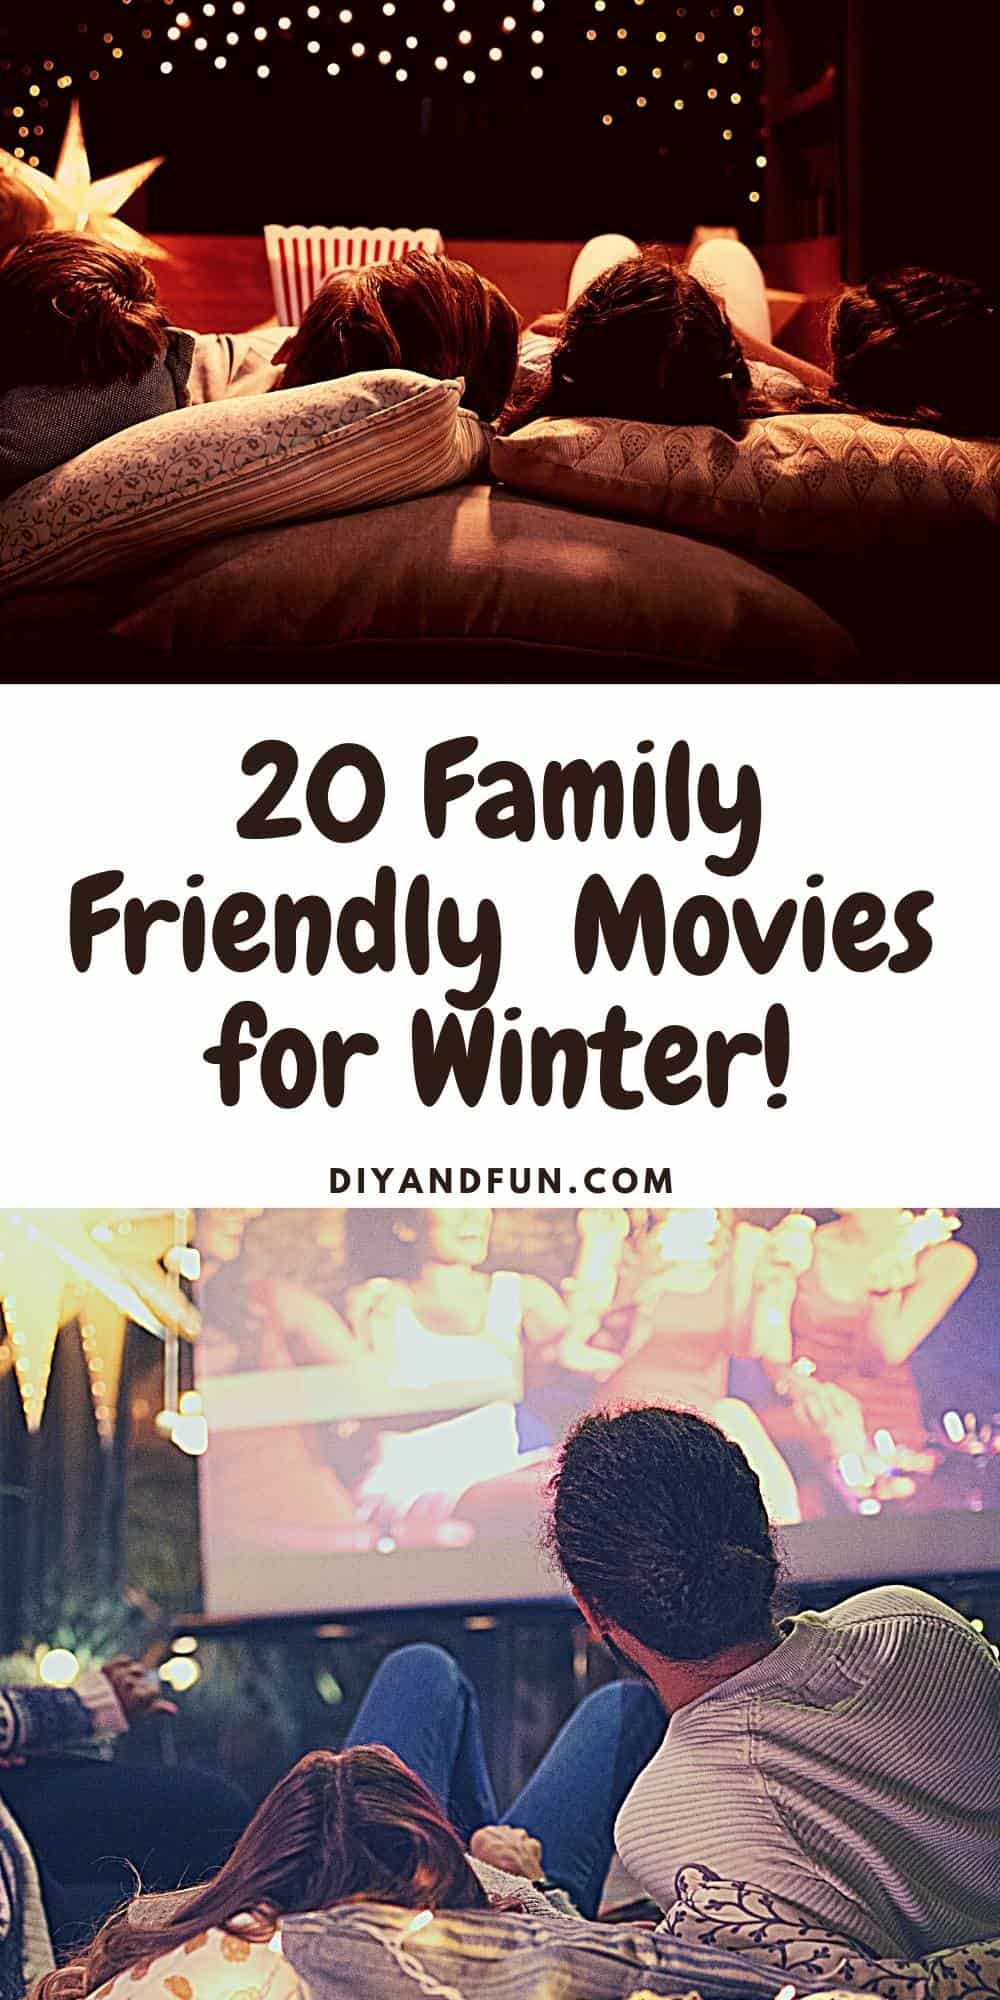 20 Family Friendly Movies for Winter, a simple listing of what makes a good family movie. Movies featured are from holidays to spring season.